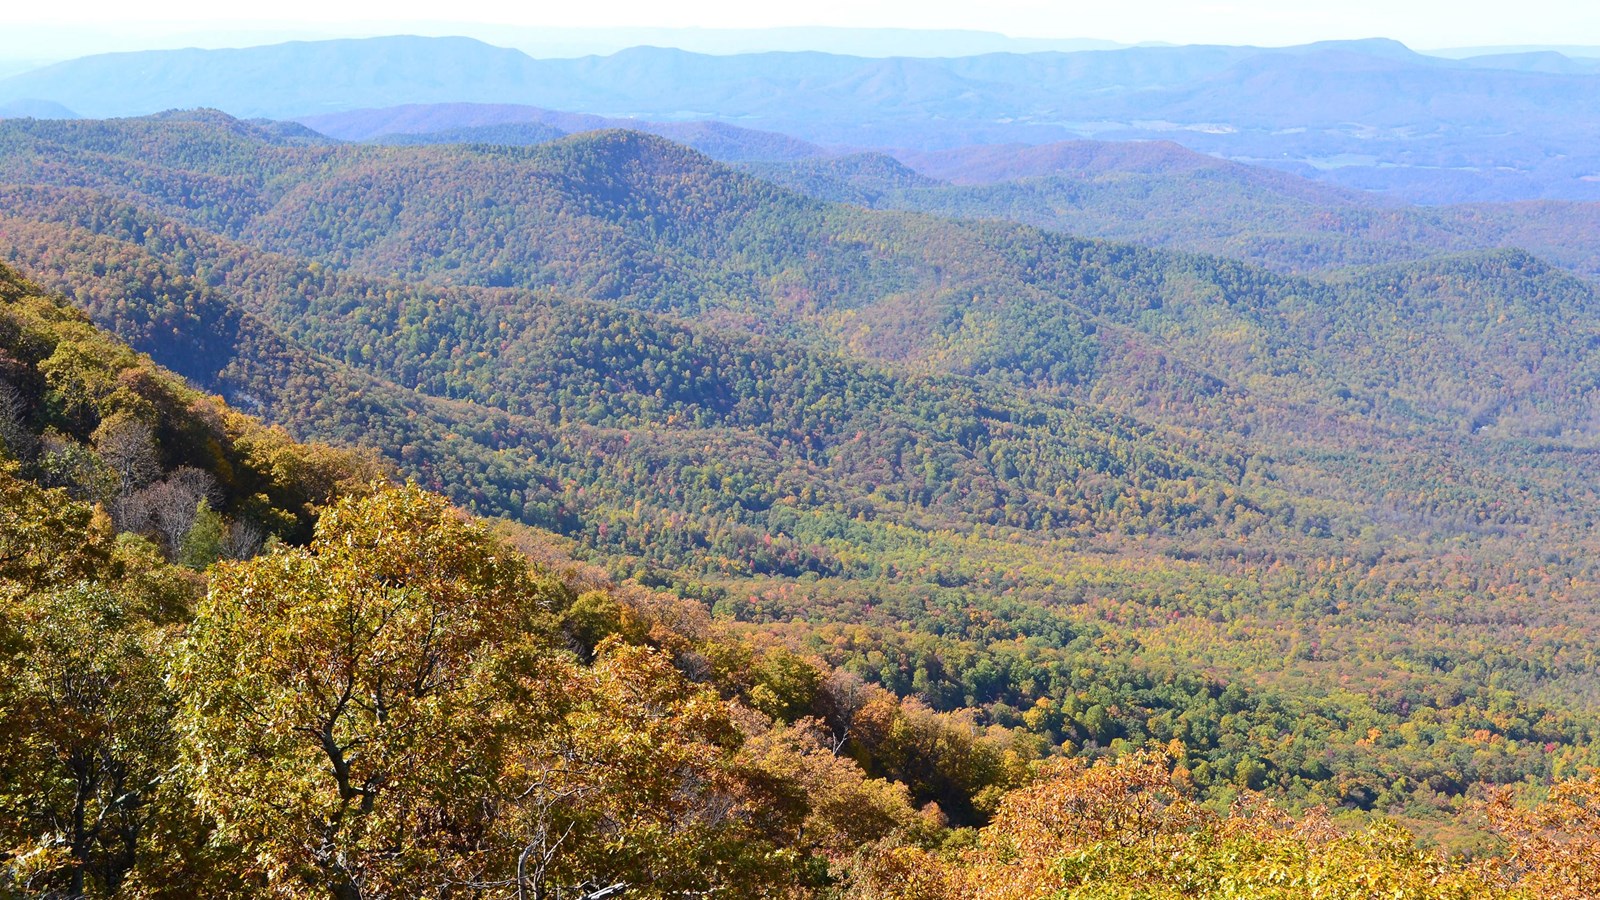 Fall colors cloak a vast swath of forest below, while mountains rise in the distance